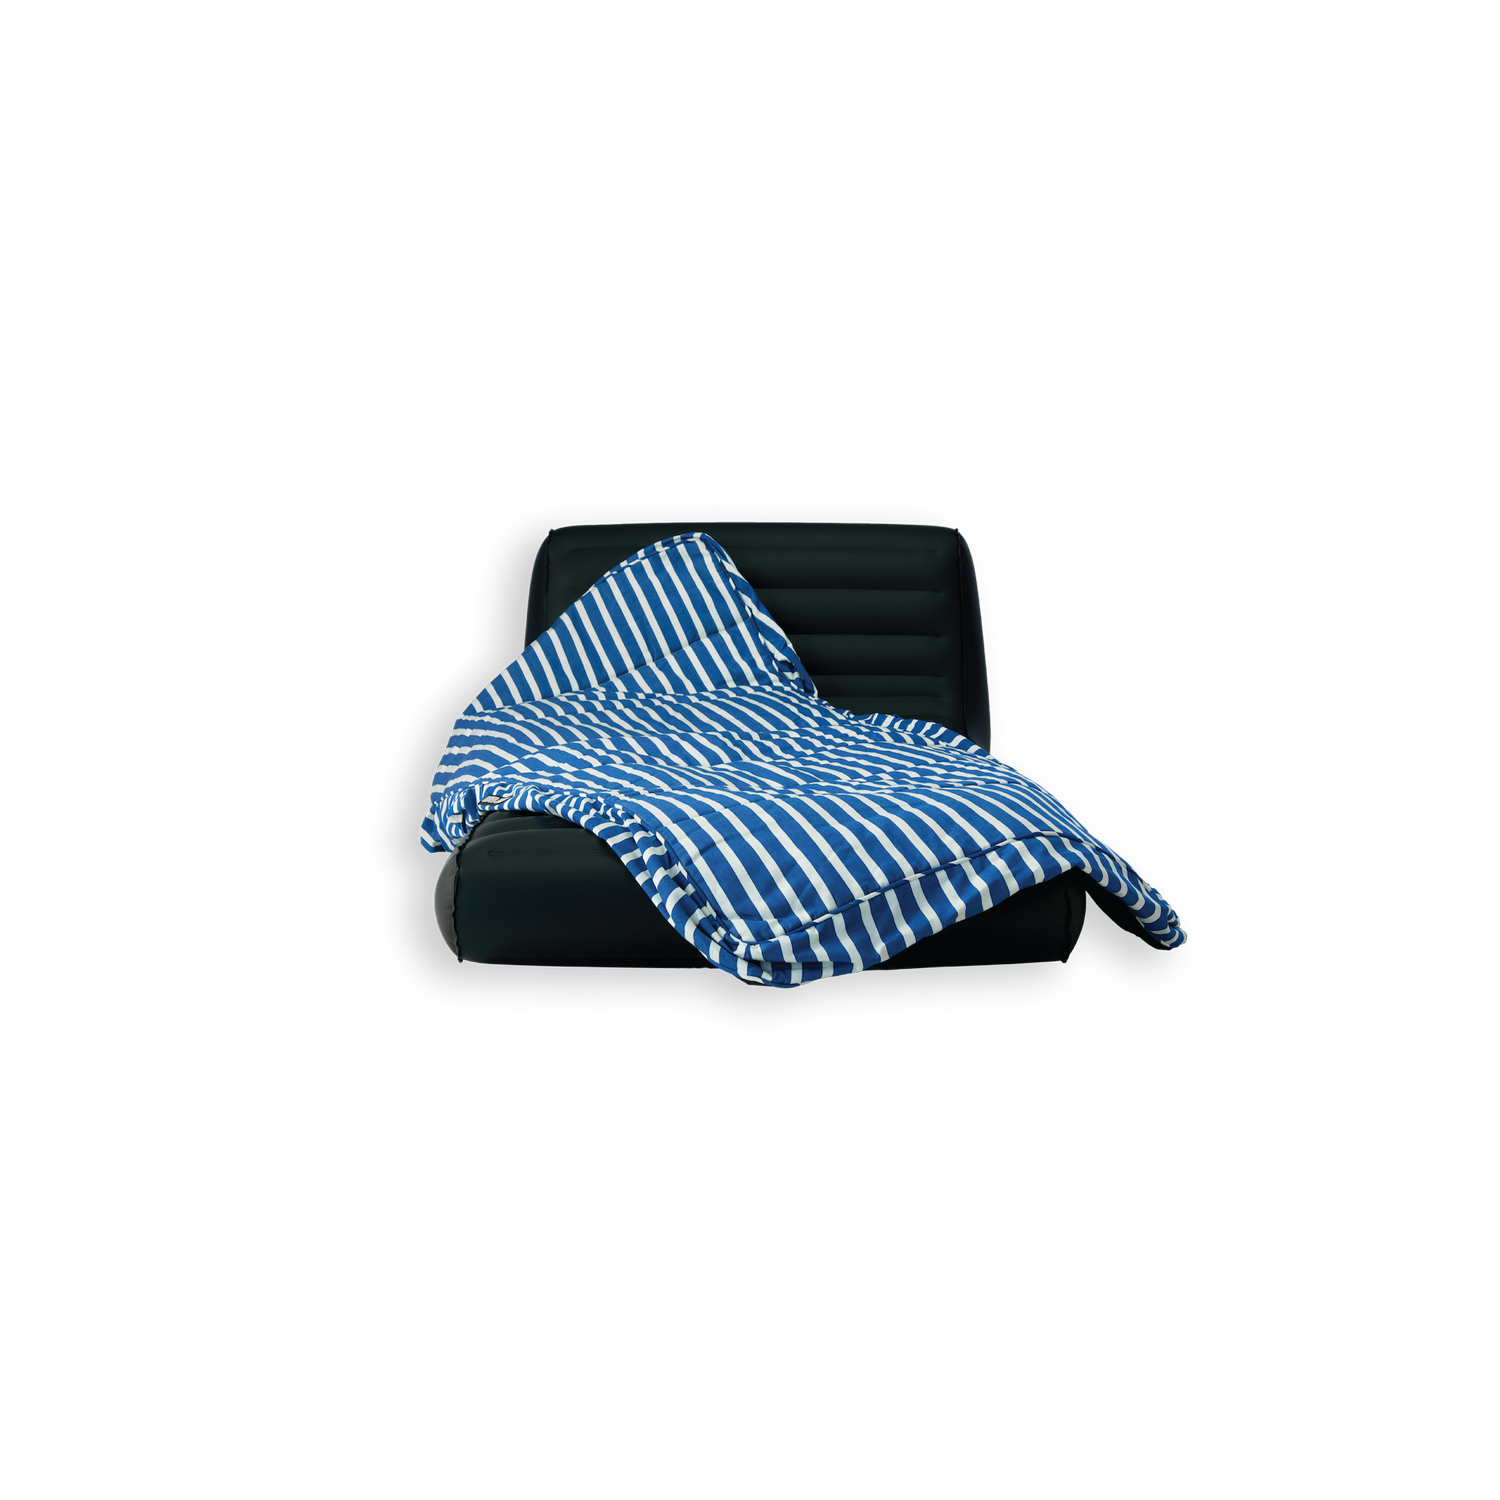 A blue and white striped luxury pool float cover draped over a TPU inflatable core.